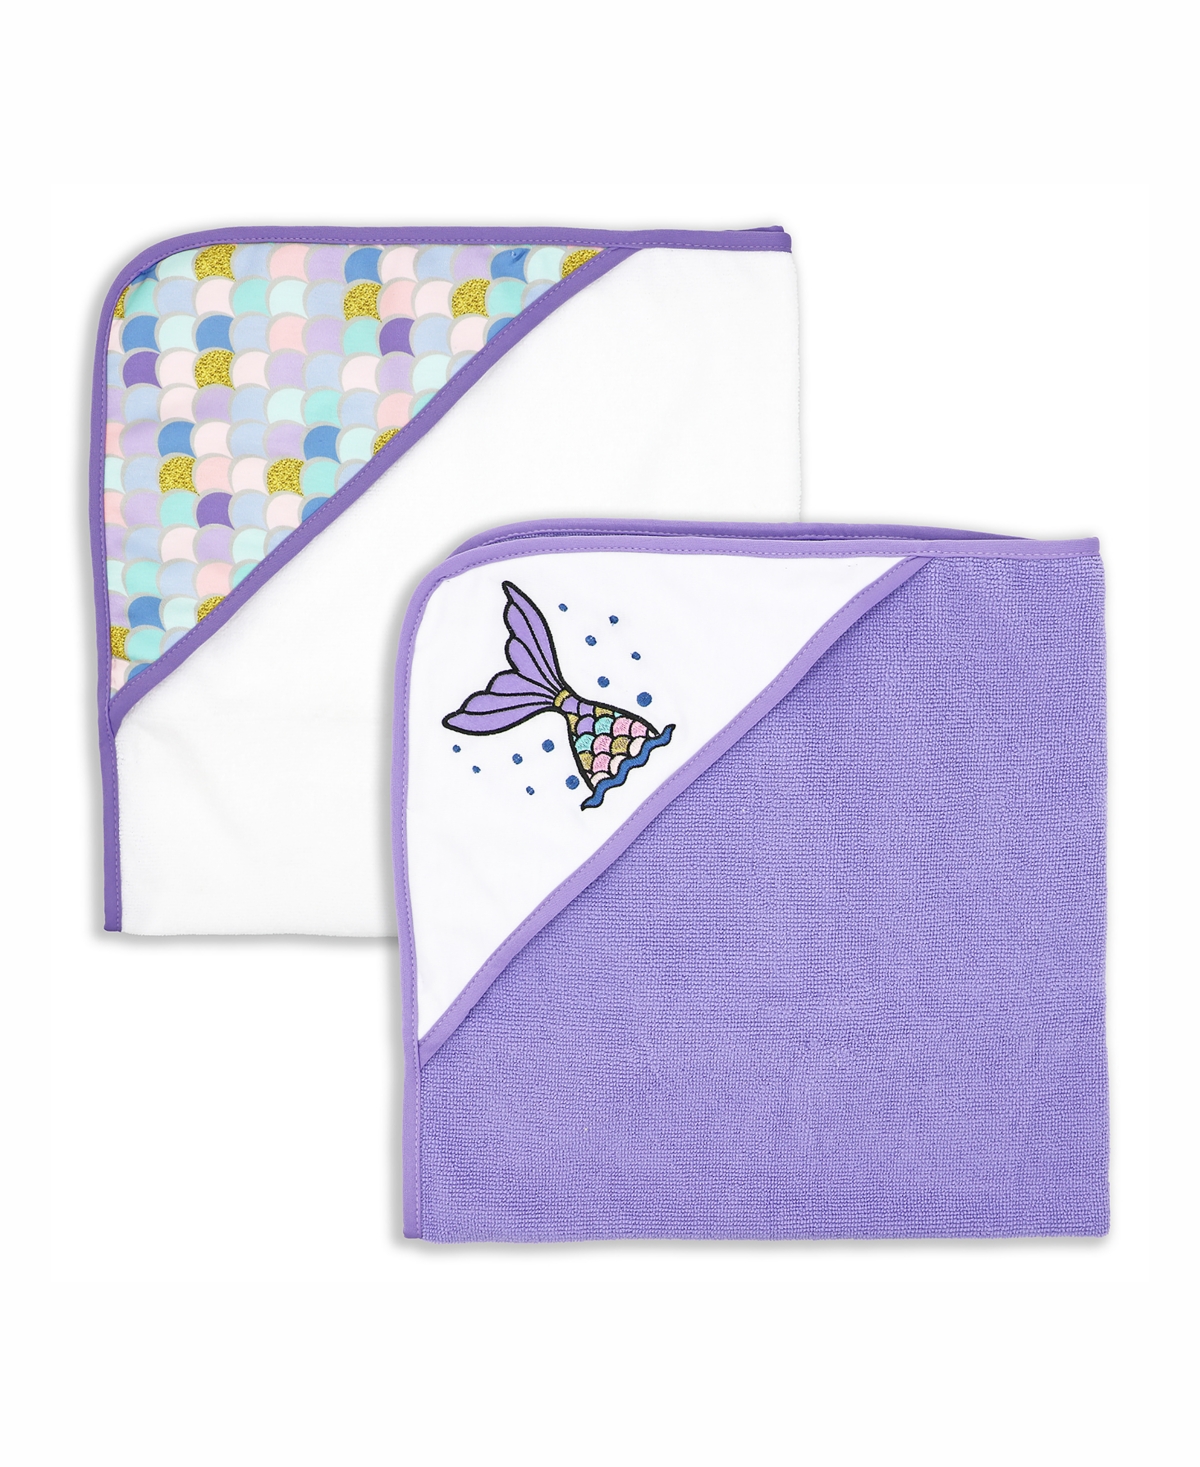 3 Stories Trading Baby Girls Mermaid Hooded Towels, Pack Of 2 In Purple And White